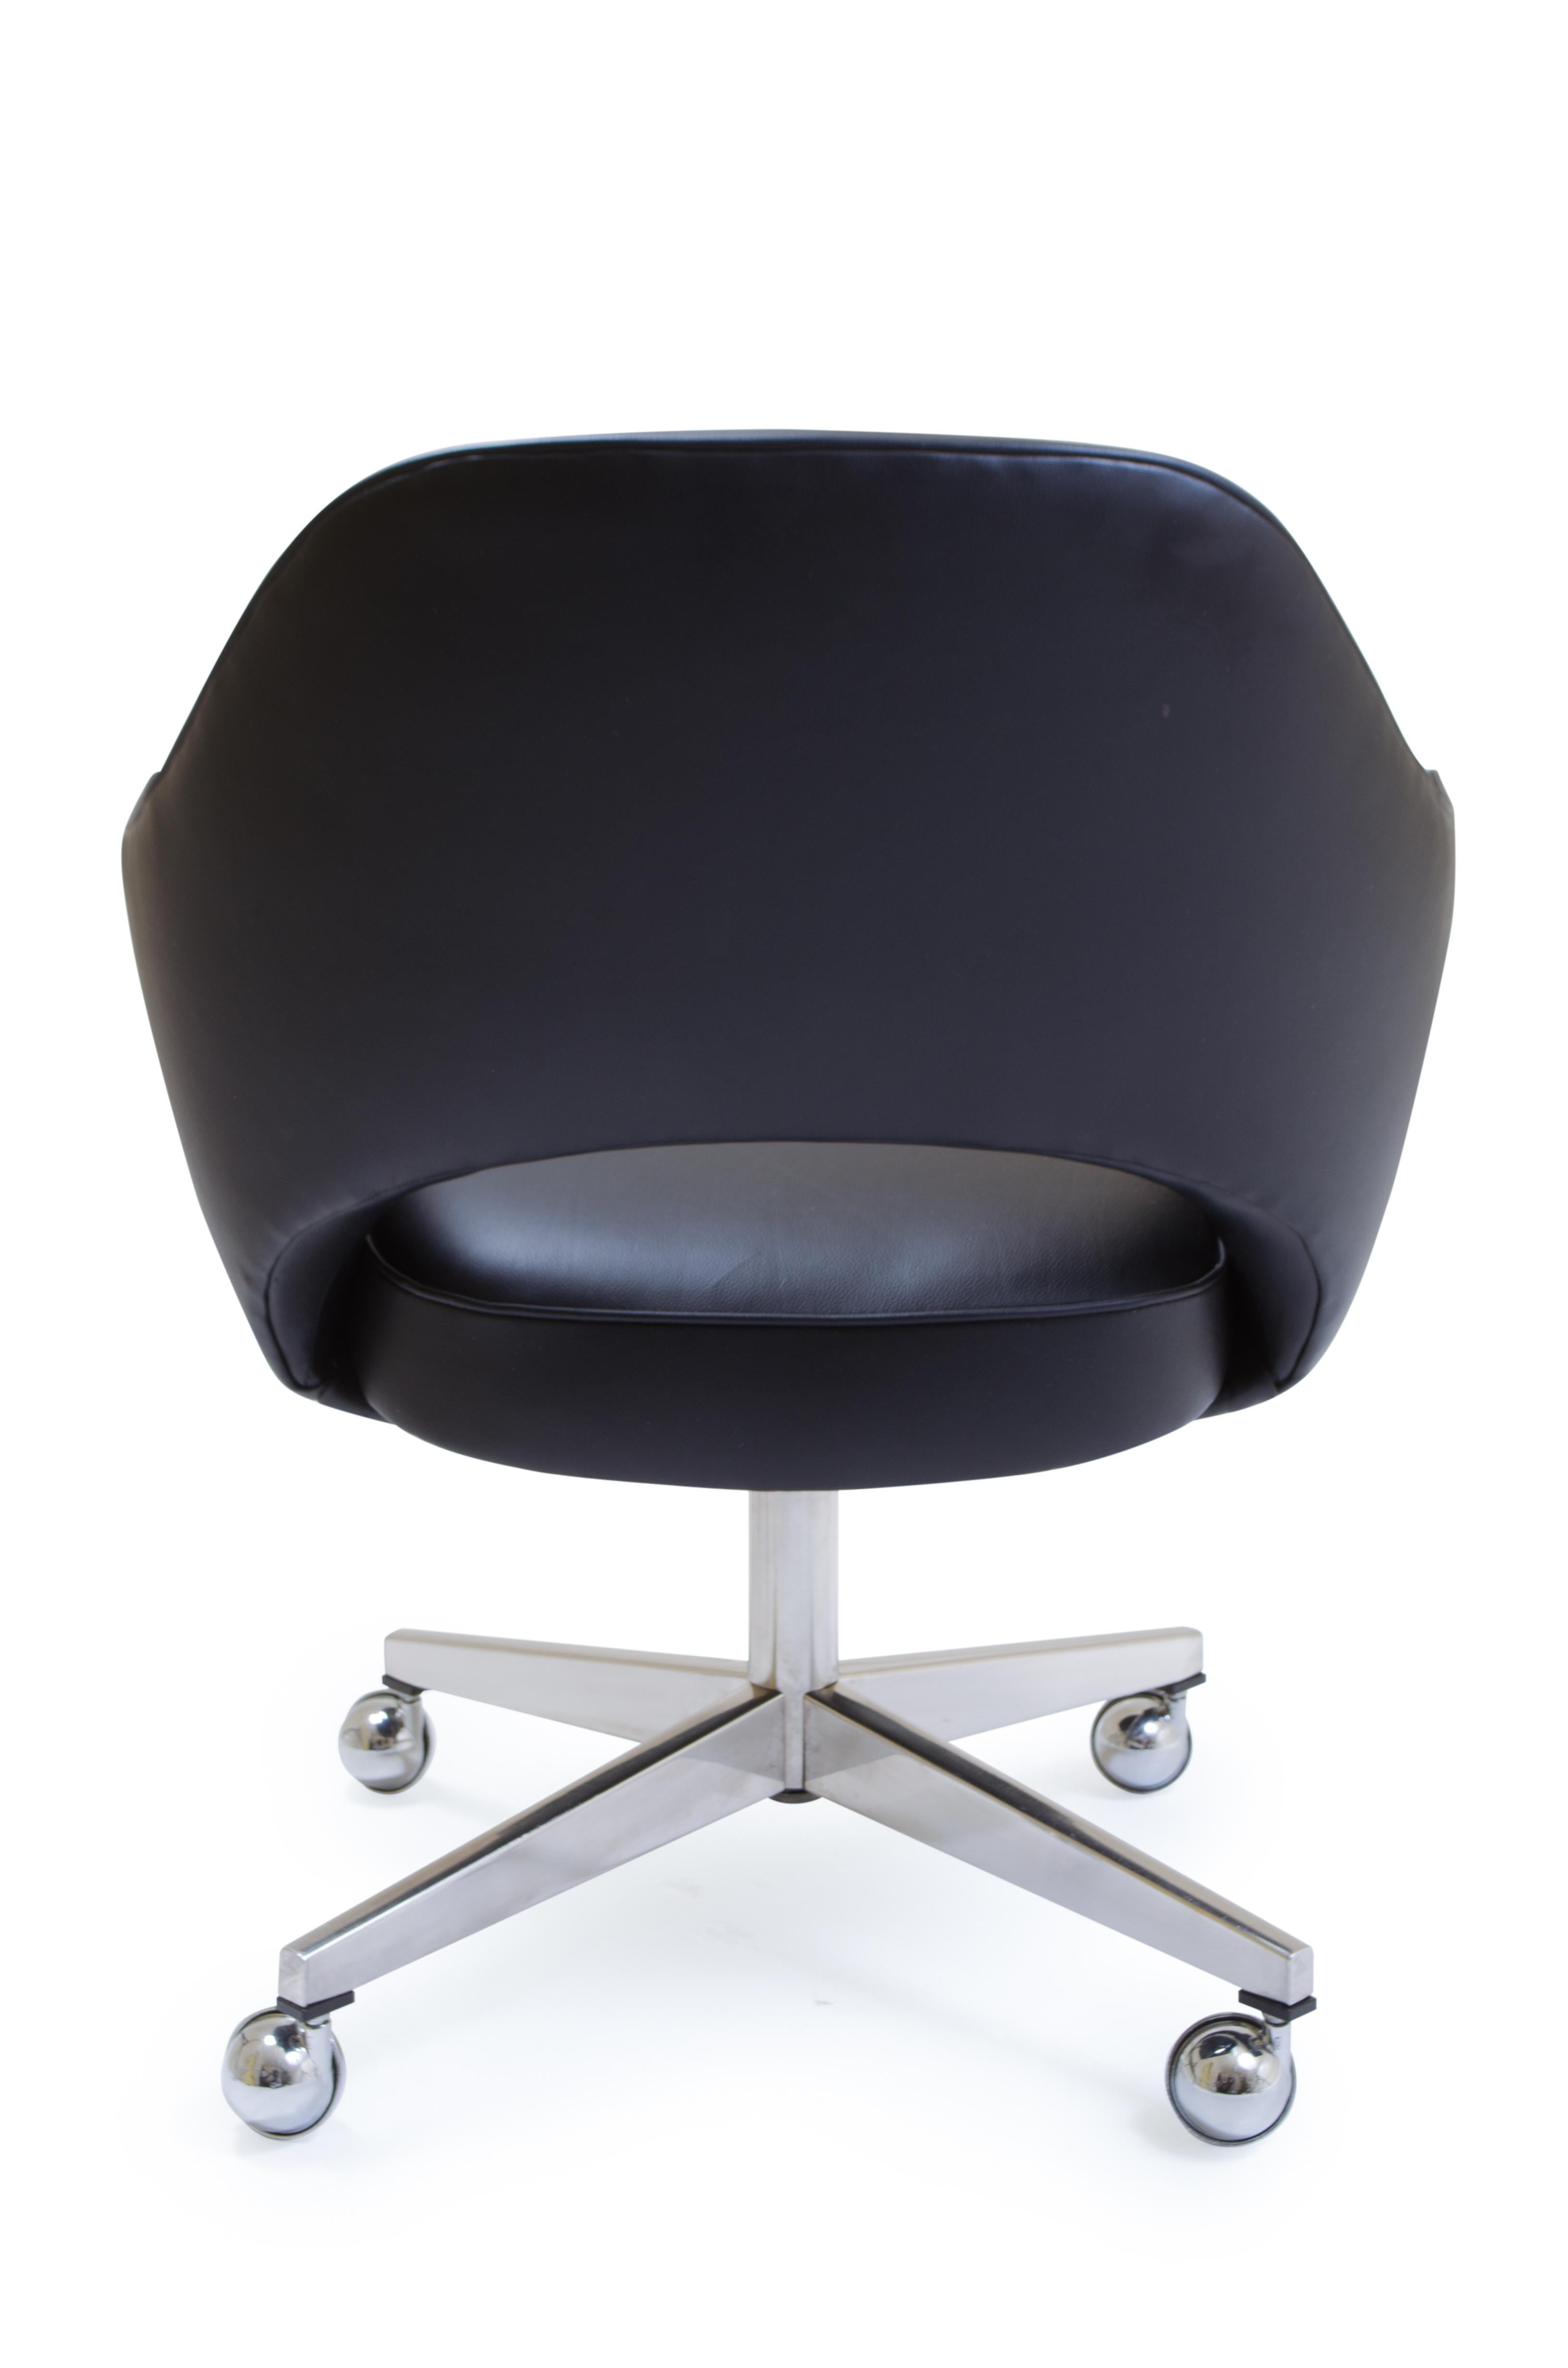 Saarinen Executive Armchair in Original Black Leather, Vintage Swivel Base In Good Condition For Sale In Wilton, CT